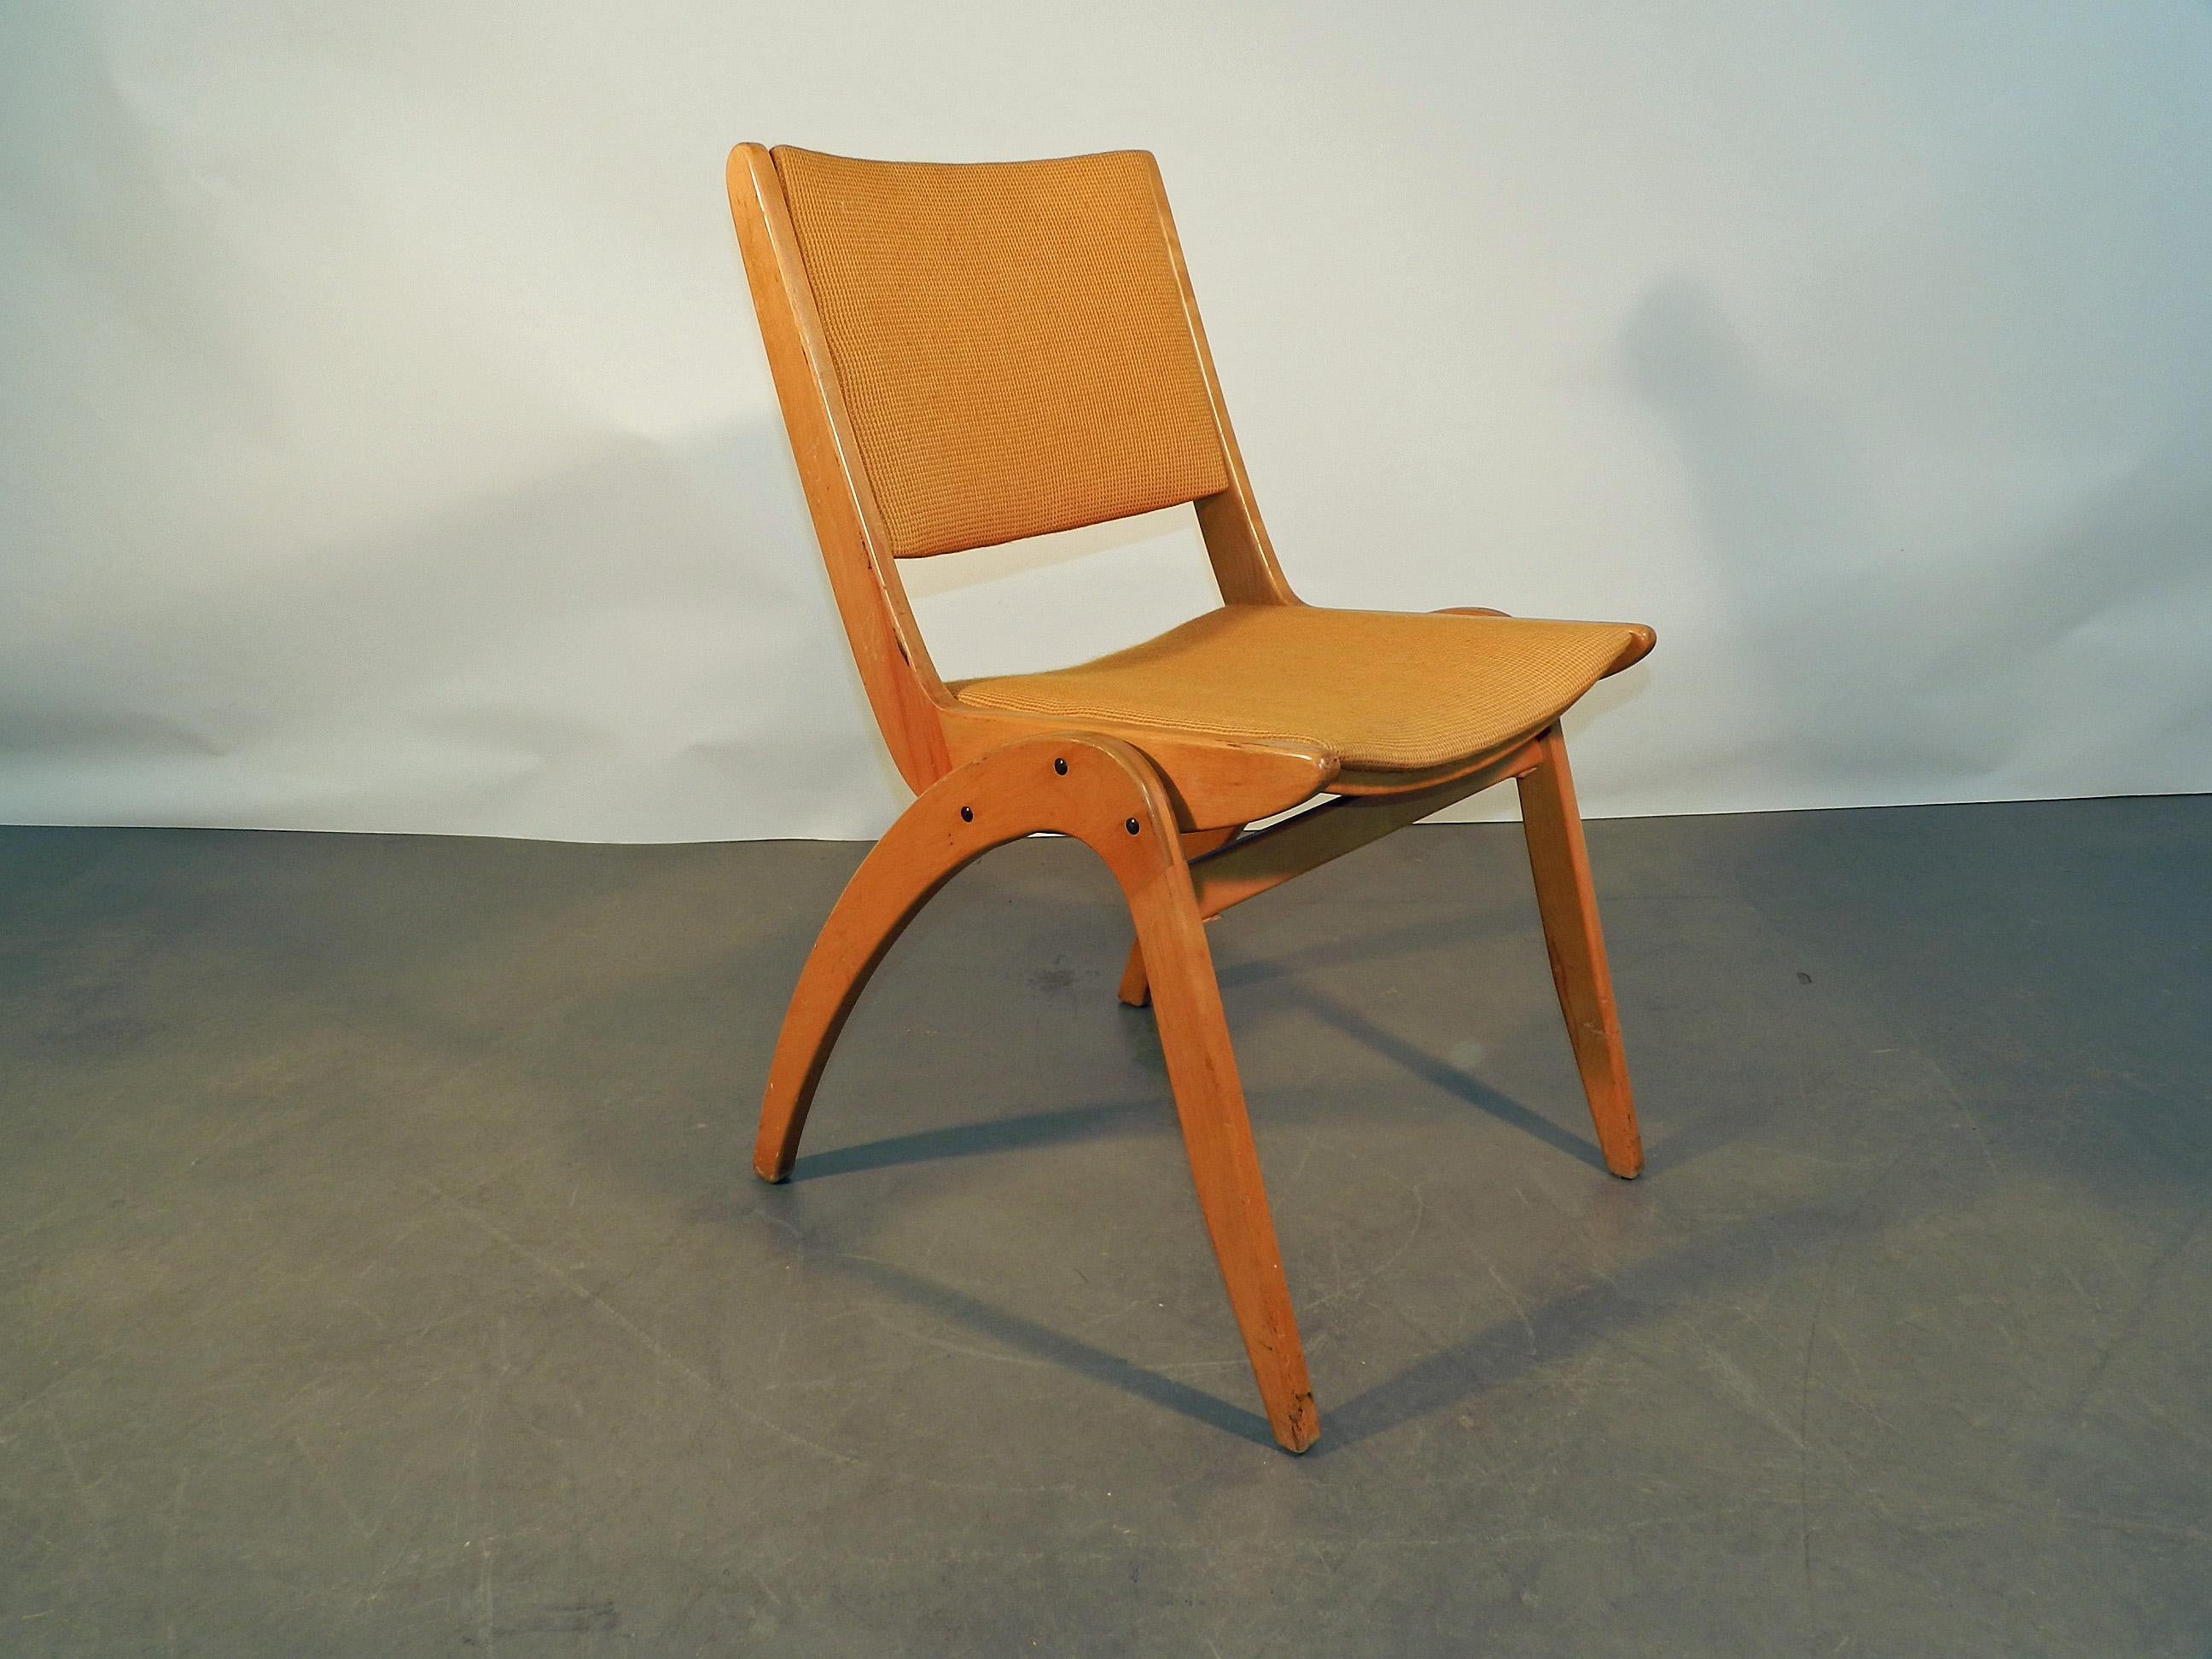 1960 vintage chairs